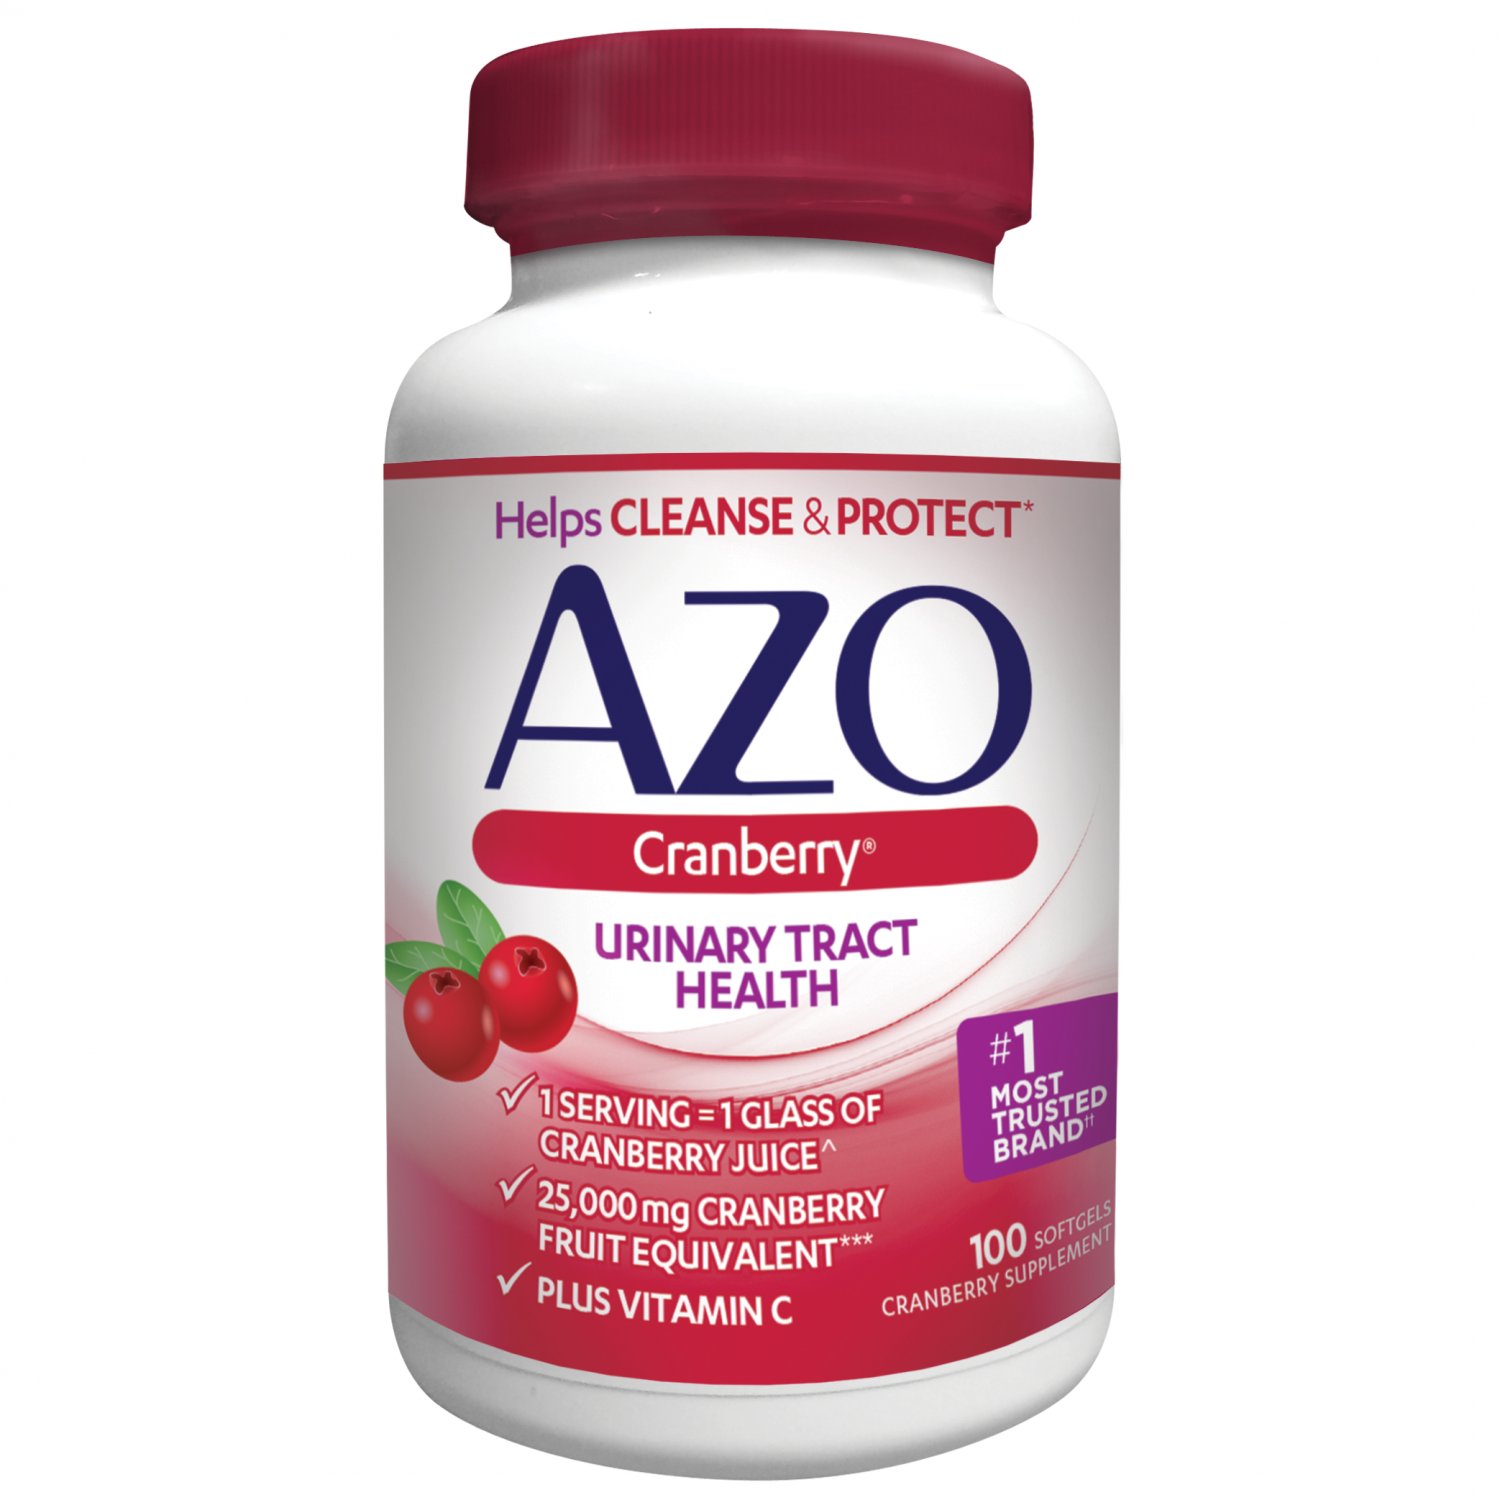 AZO Cranberry Urinary Tract Health Supplement 100 Softgels